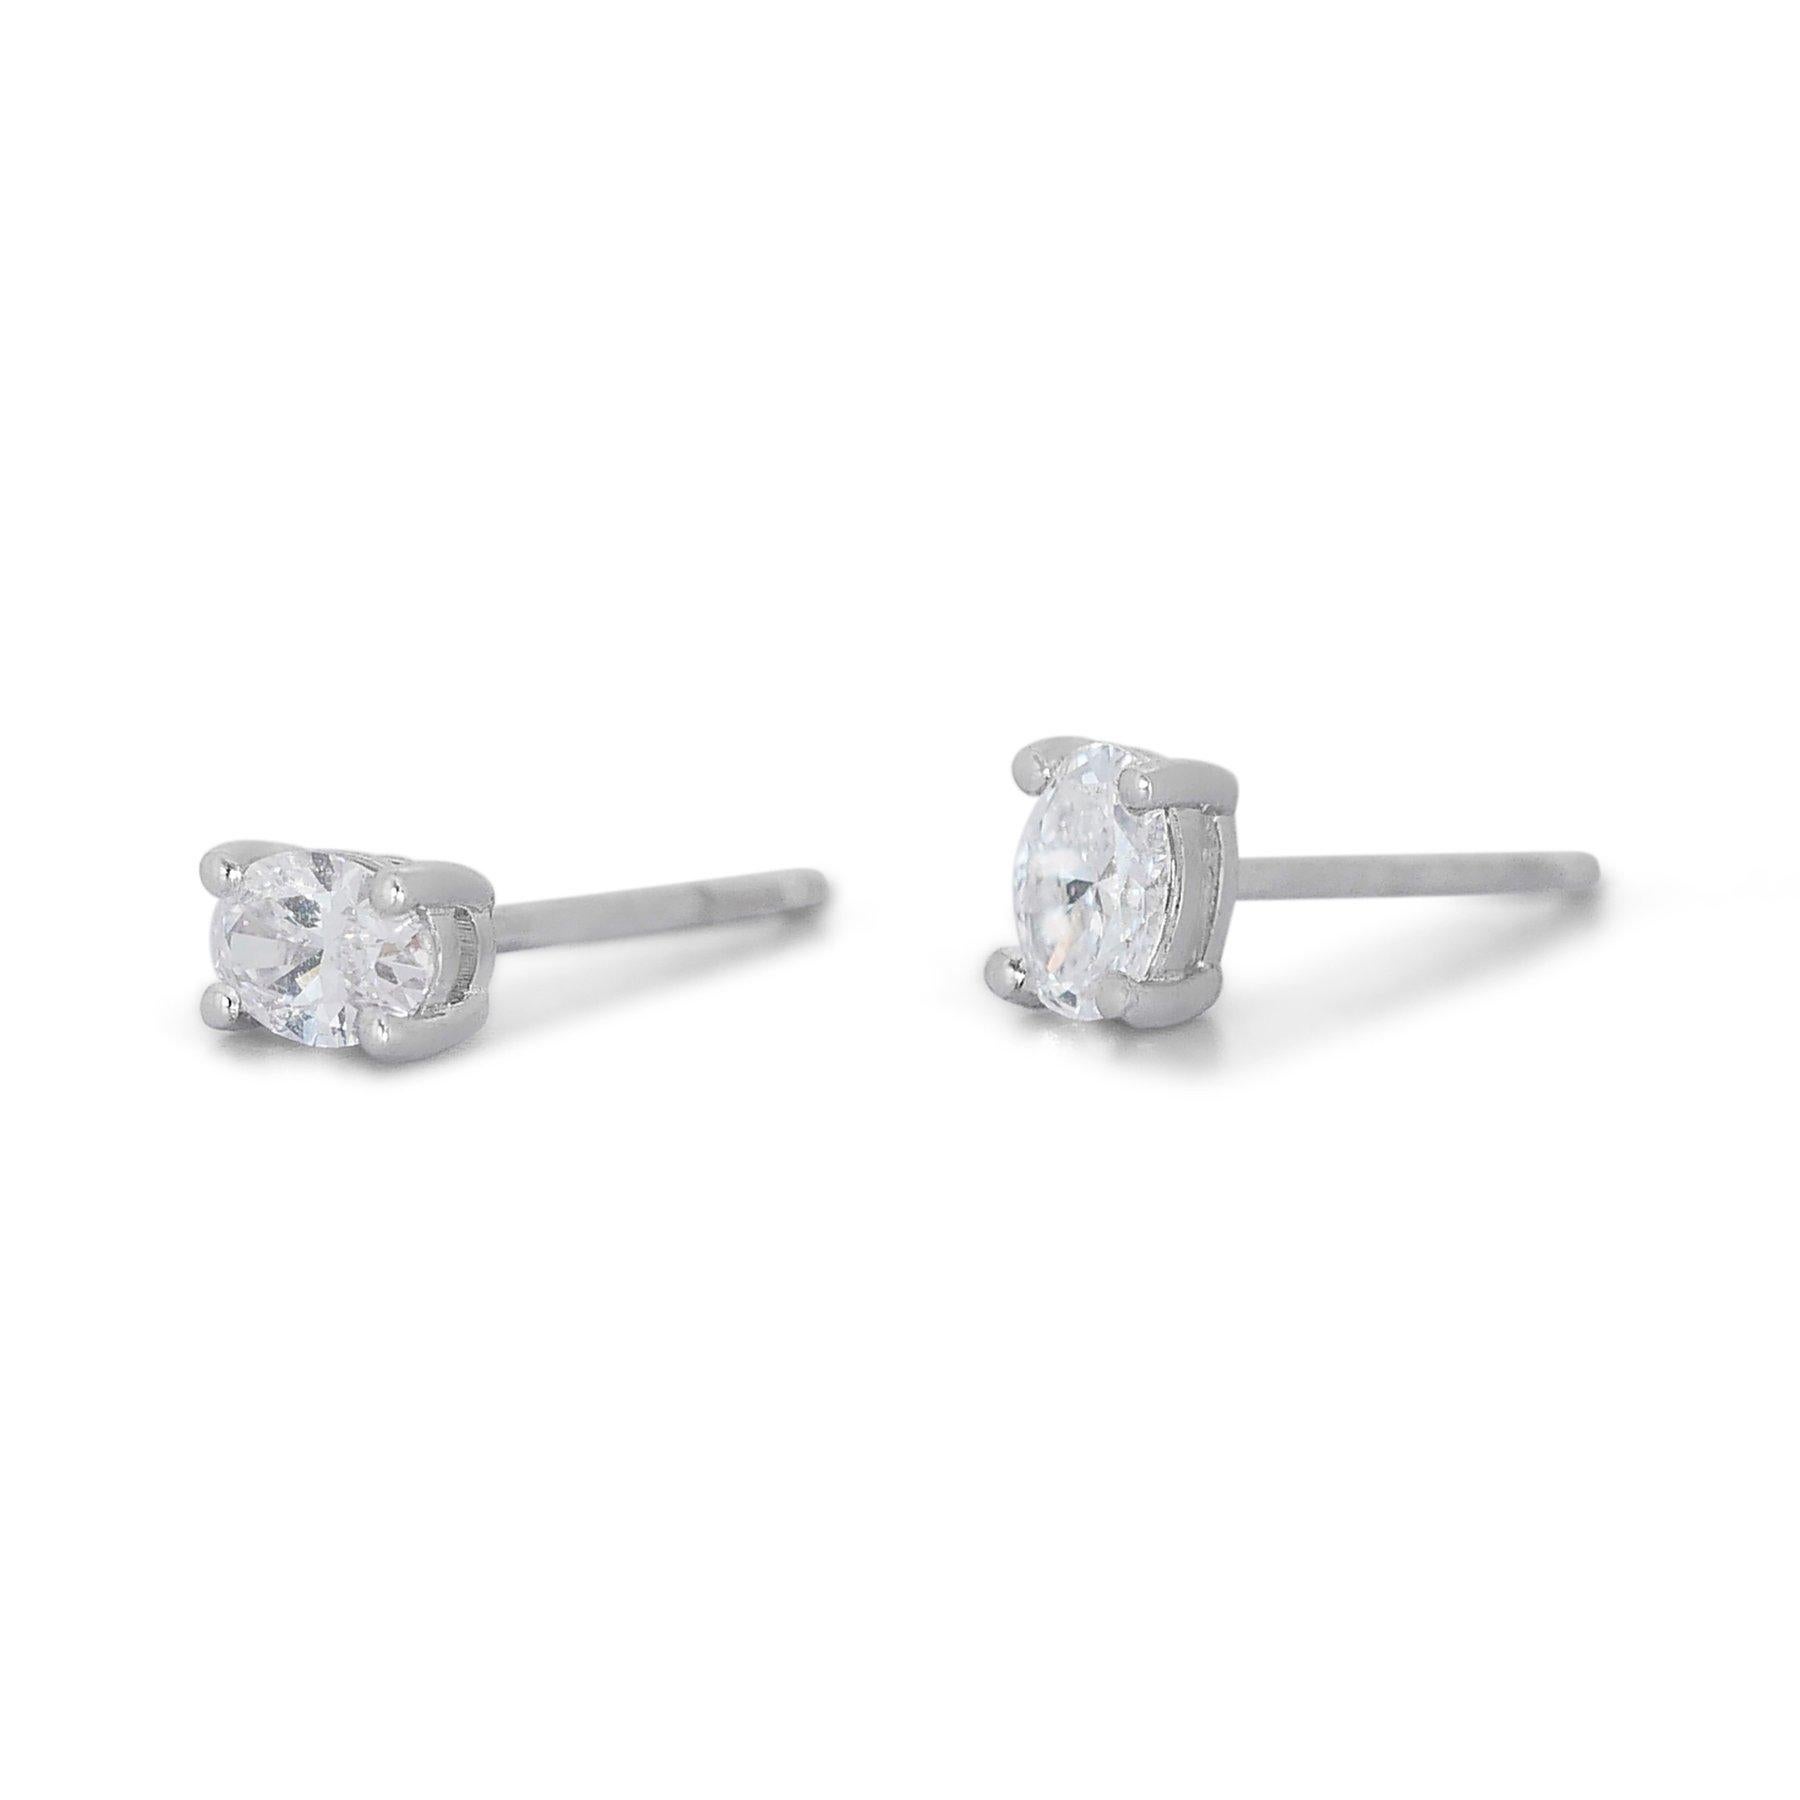 Oval Cut Exquisite 1.40ct Oval Diamond Stud Earrings in 18k White Gold - GIA Certified For Sale